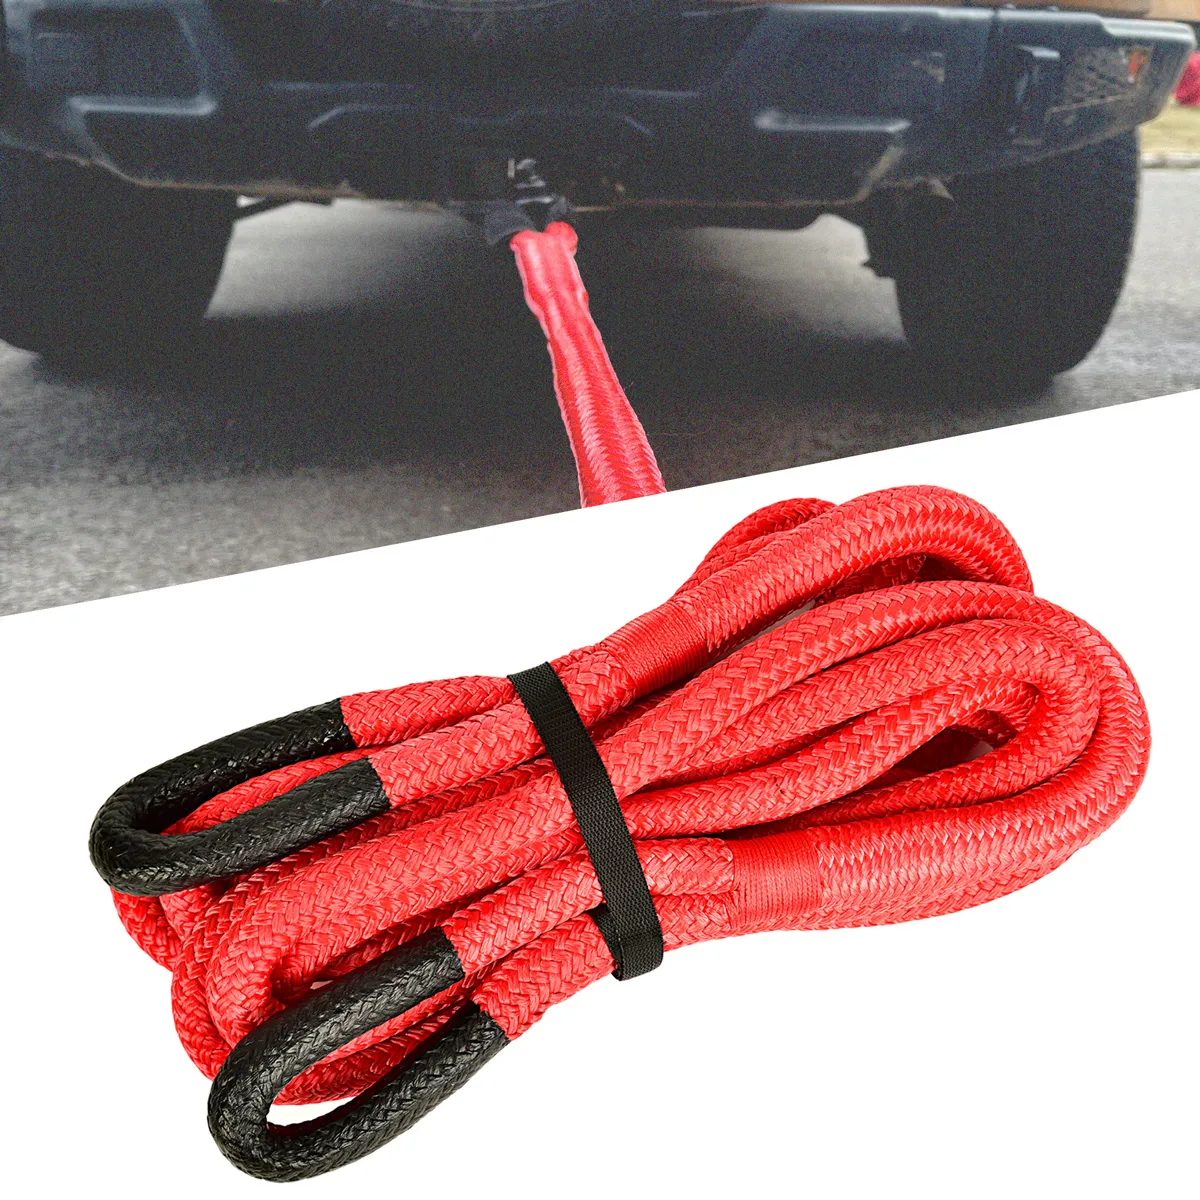 Car Tow Rope 22mm x 6m Nylon Kinetic Recovery Rope with 12,000kg/26,400lb Breaking Strength for ATV, UTV, and Truck